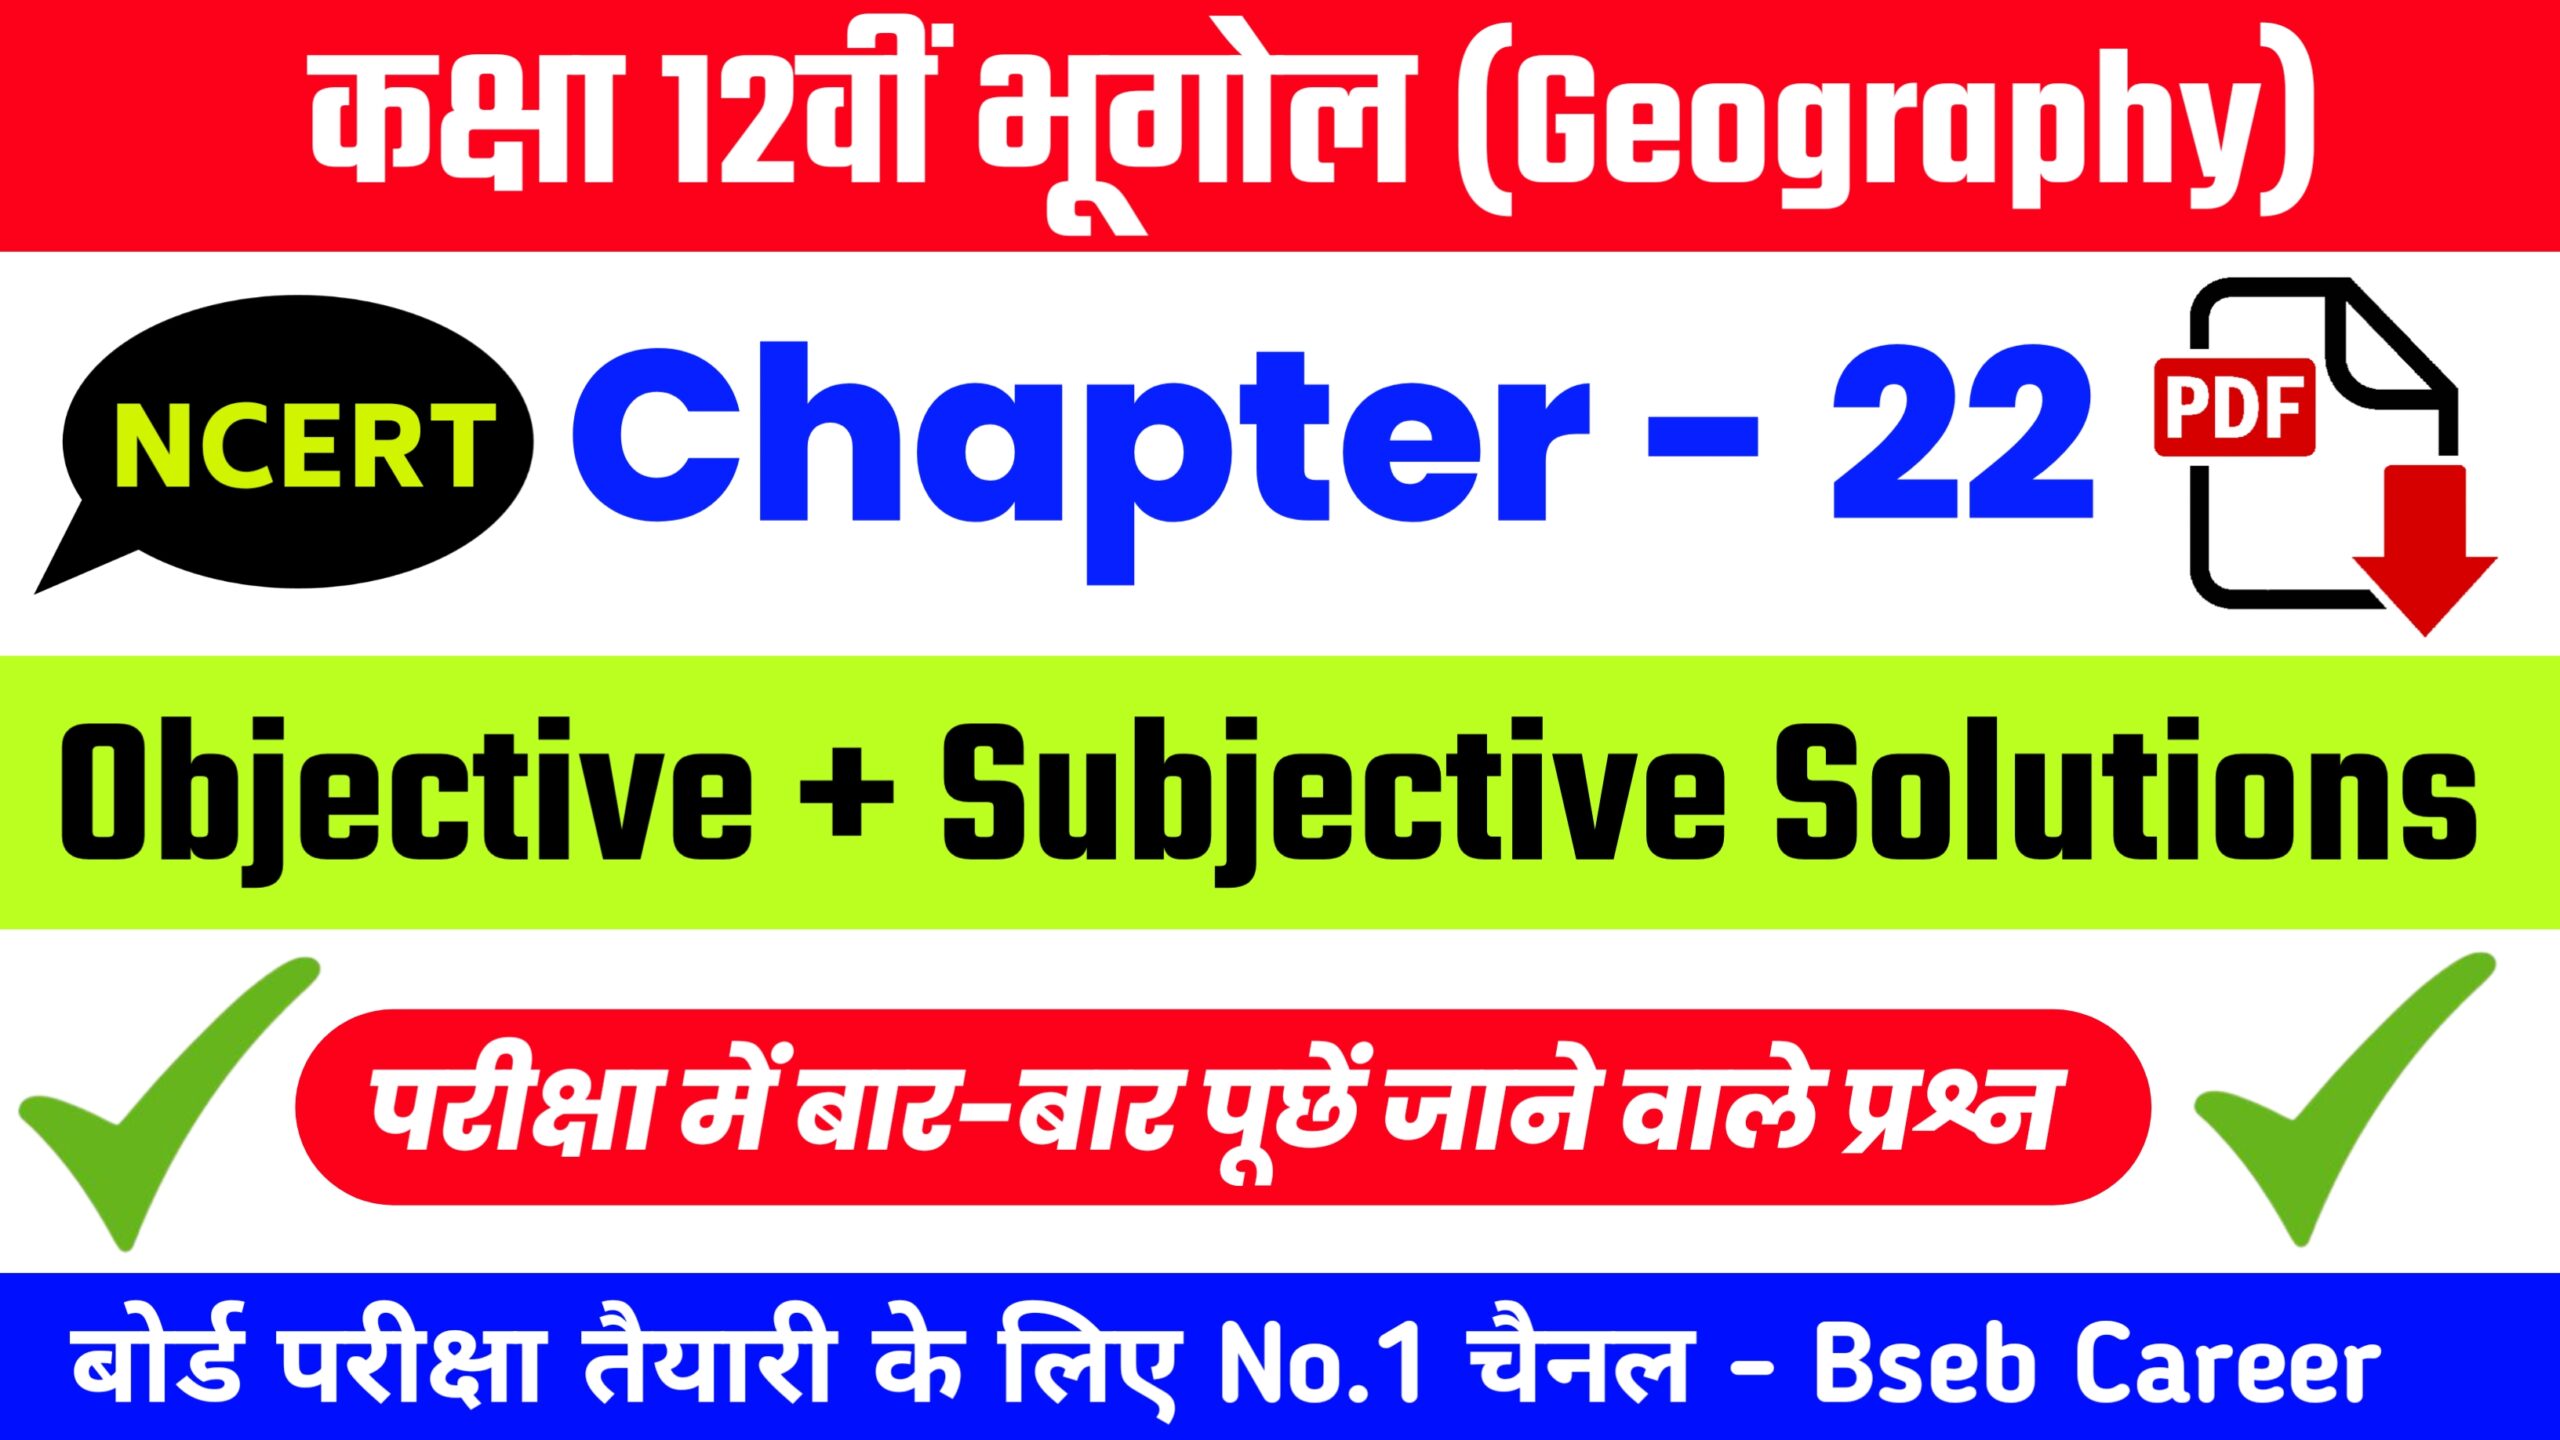 Class 12th Geography Chapter 22